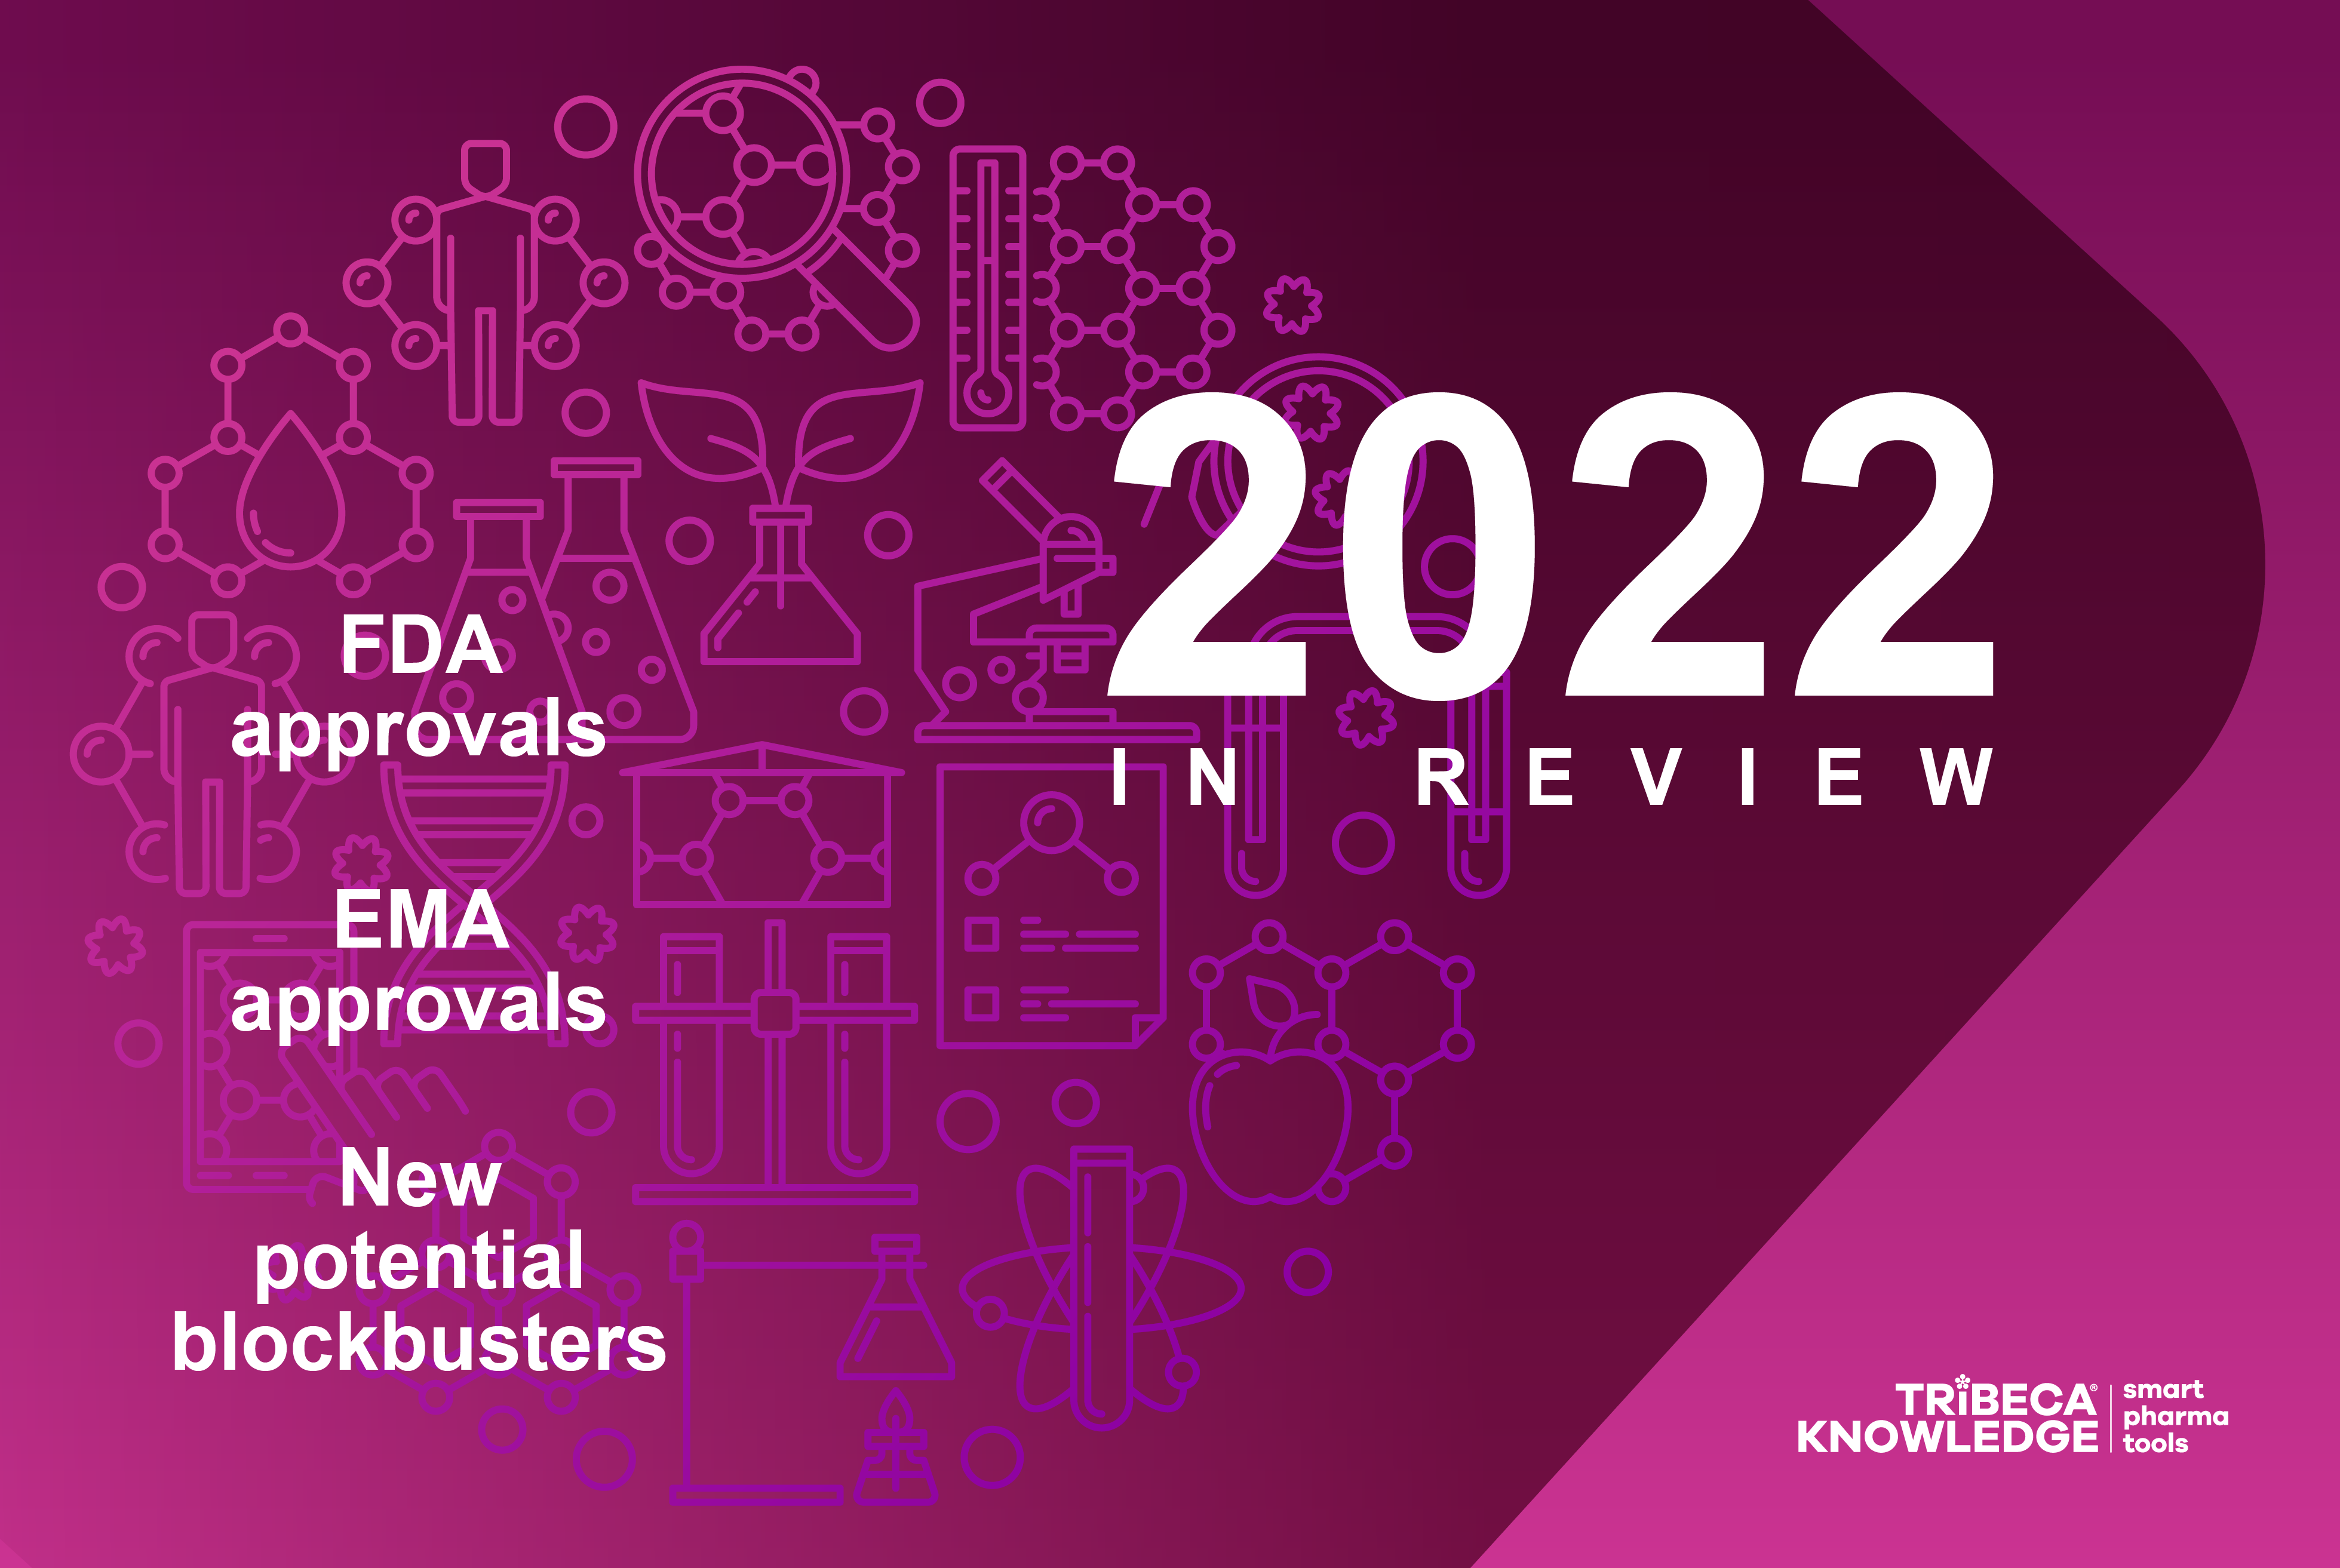 Hero graphic showing that this article: 2022 In Review contains information about FDA approvals, EMA approvals and potential new blockbusters.